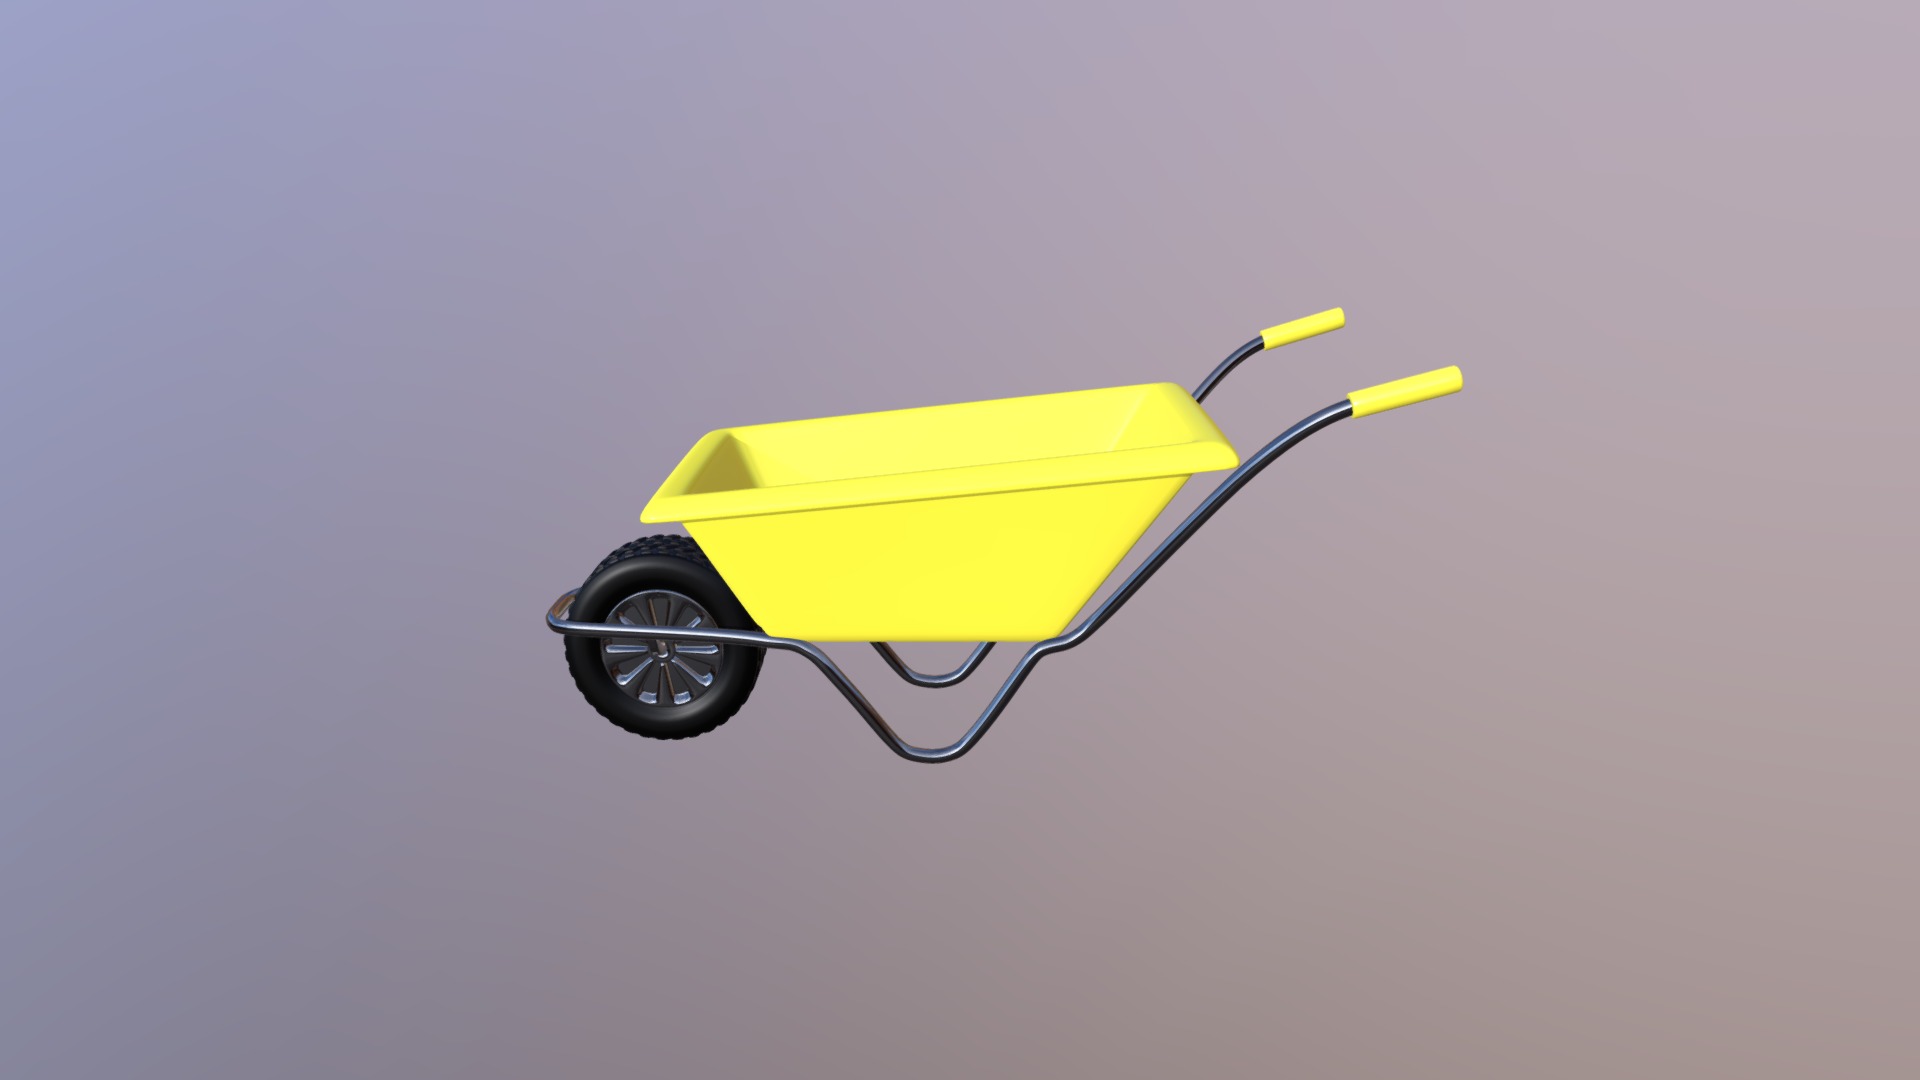 3D model Wheelbarrow - This is a 3D model of the Wheelbarrow. The 3D model is about a yellow and black scooter.